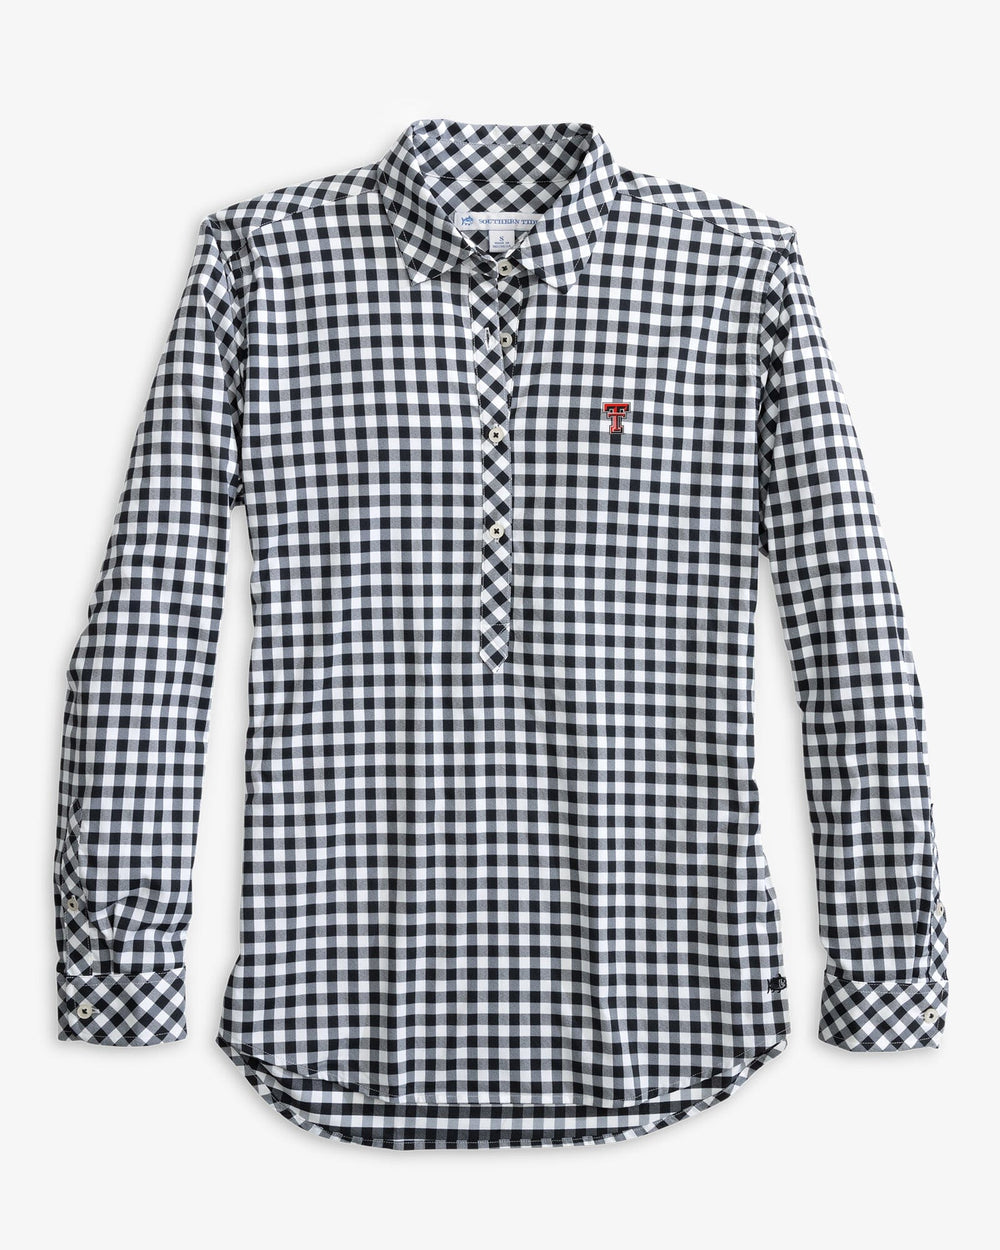 The front view of the Texas Tech Red Raiders Intercoastal Hadley Popover Shirt by Southern Tide - Black